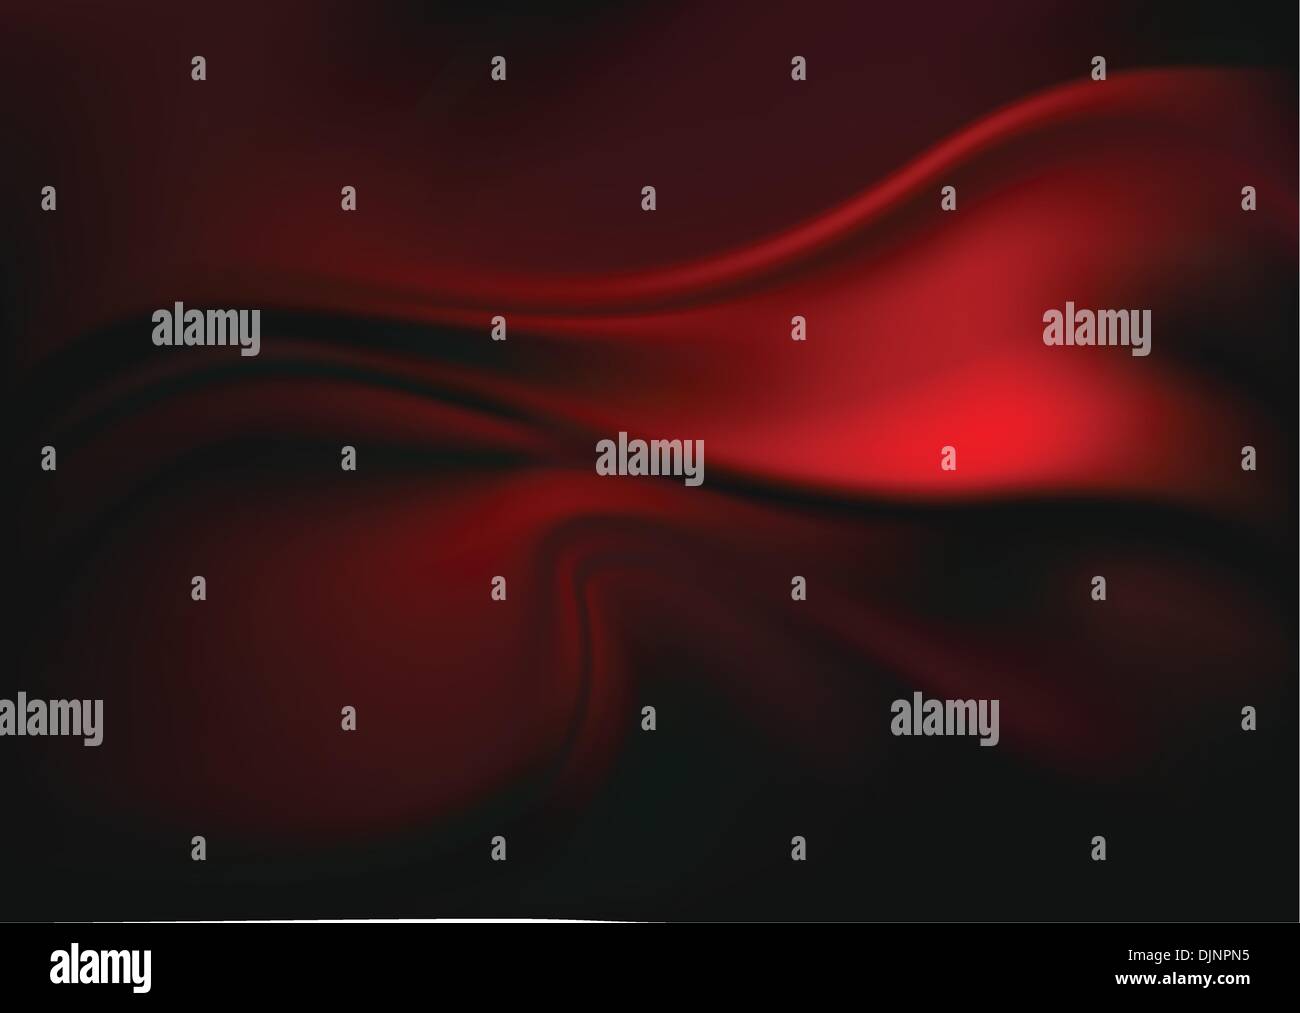 Vector illustration of abstract red background imitating smooth silk cloth Stock Vector